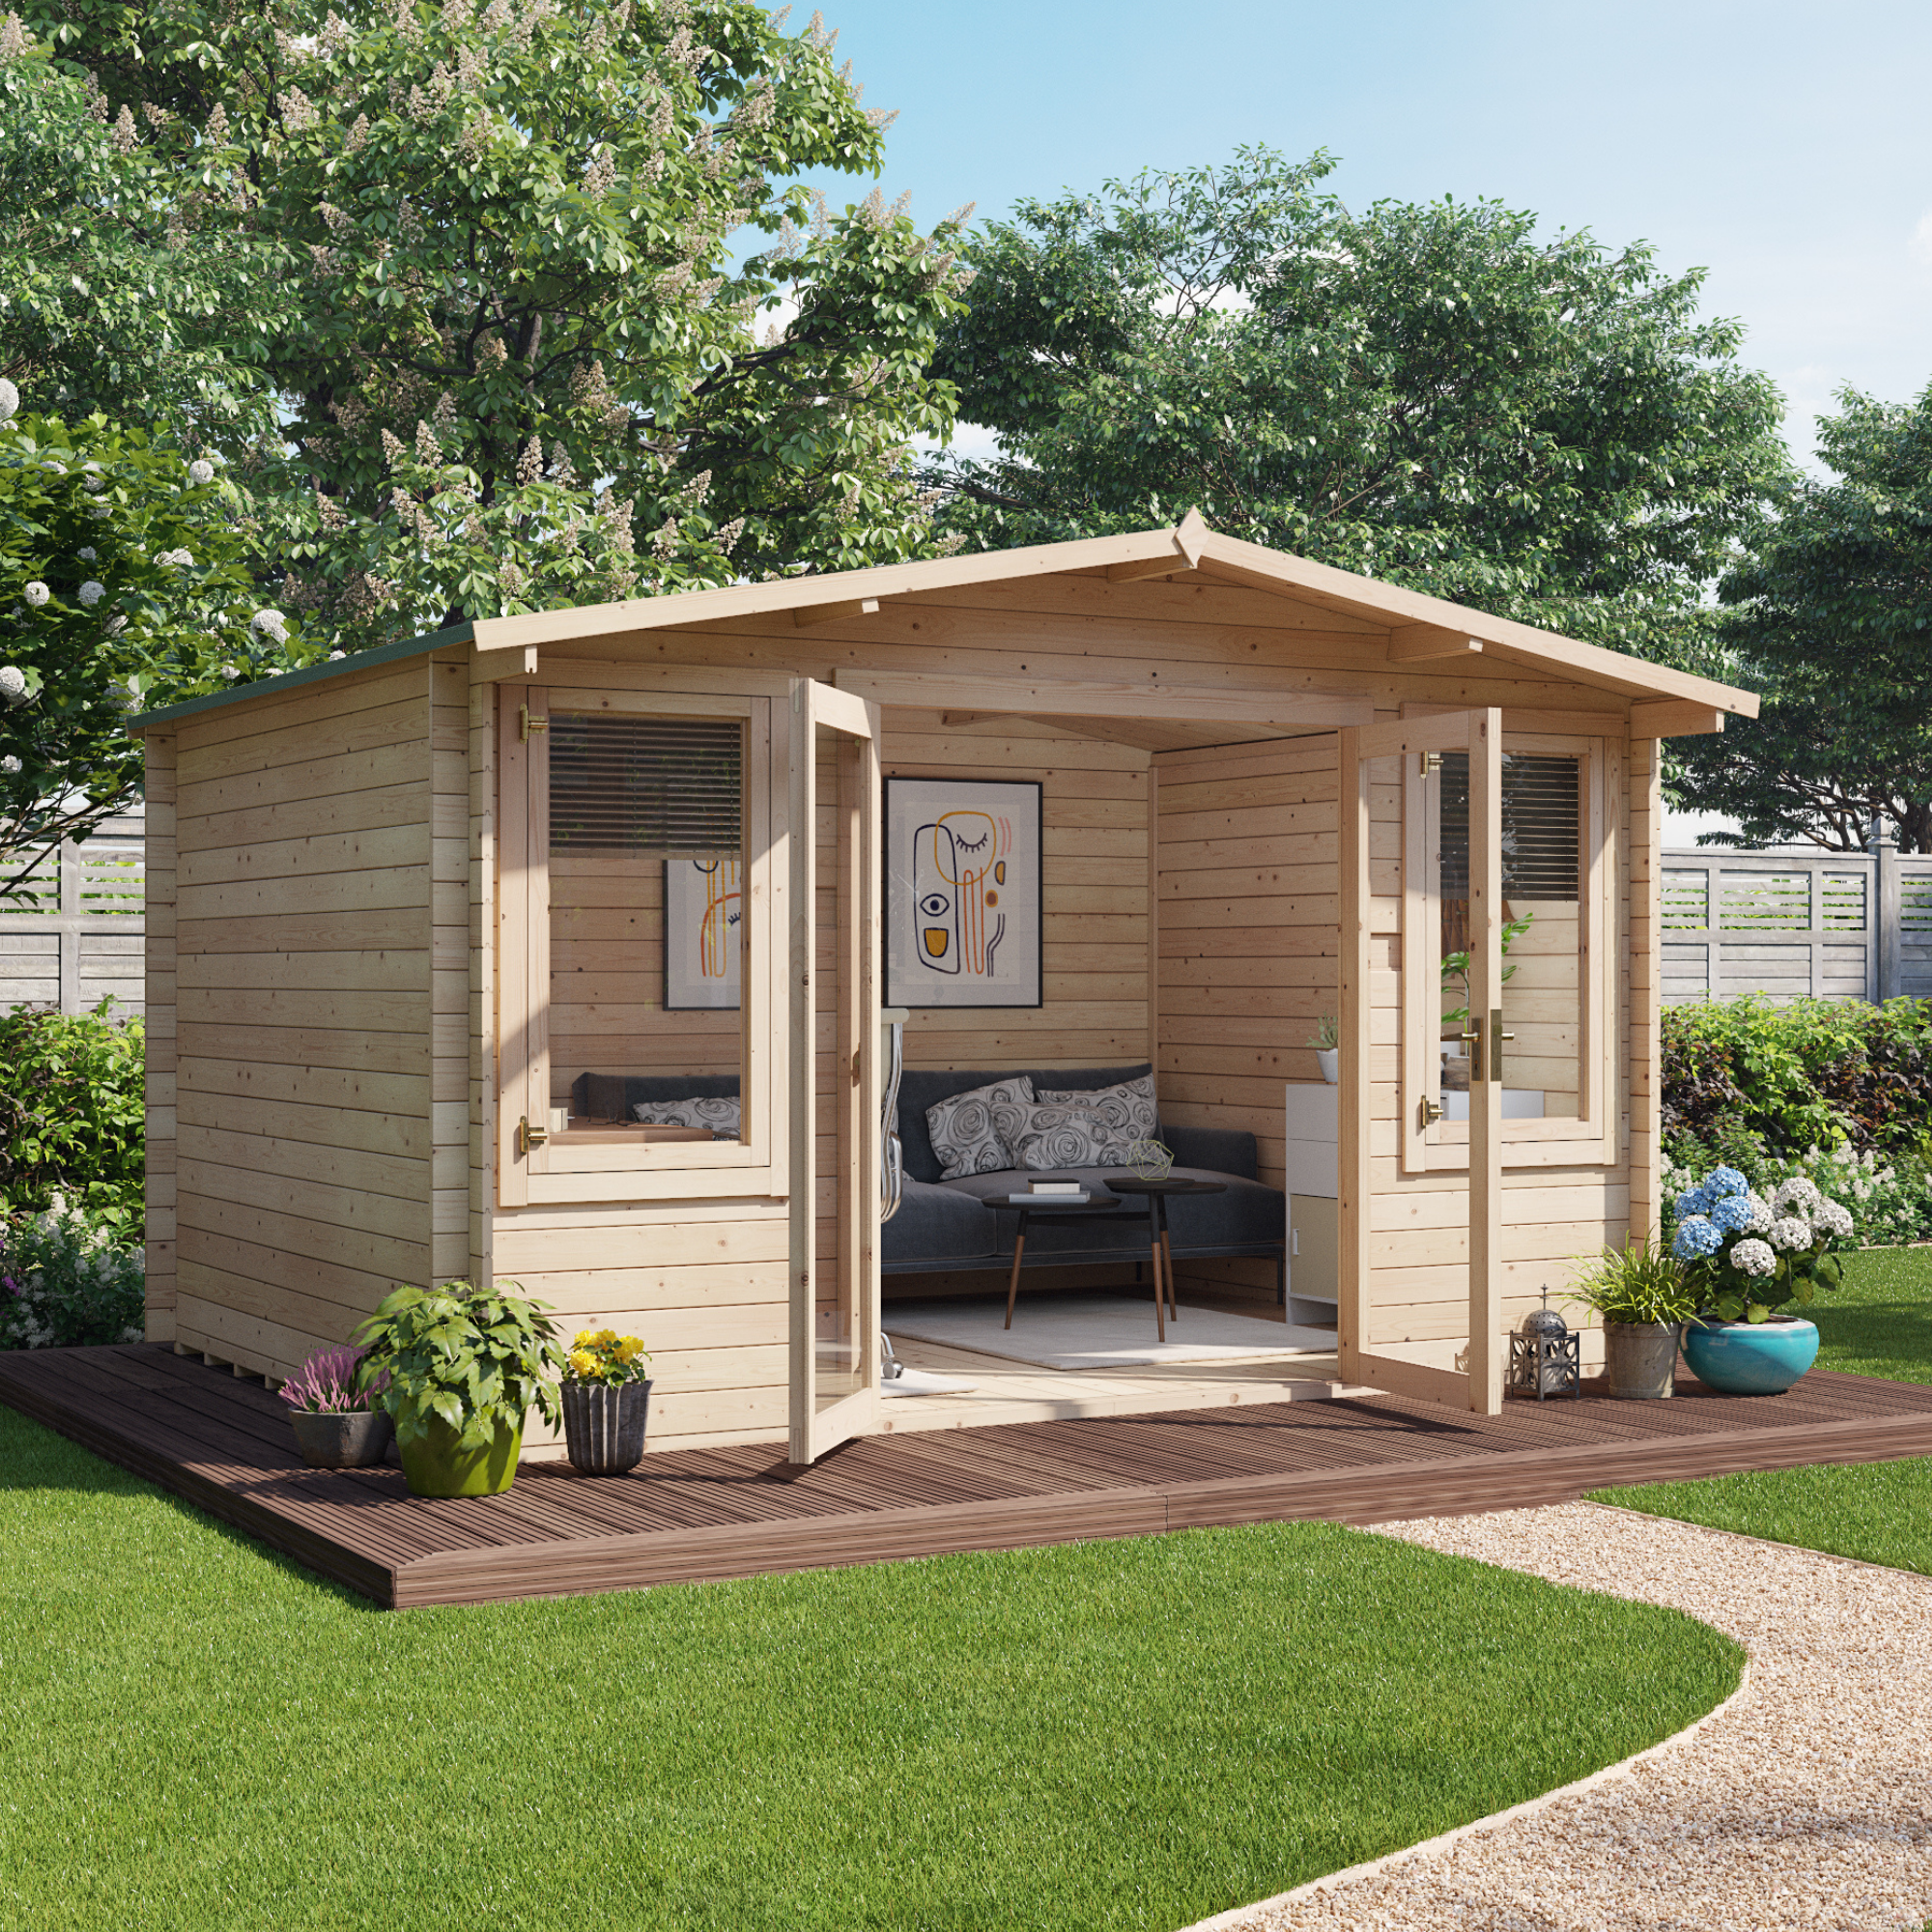 4 x 2.5 Pressure Treated Log Cabin Summerhouses - BillyOh Winchester Log Cabin - 44mm Thickness Wooden Log Cabin Summerhouse - 4m x 2.5m Garden Cabin